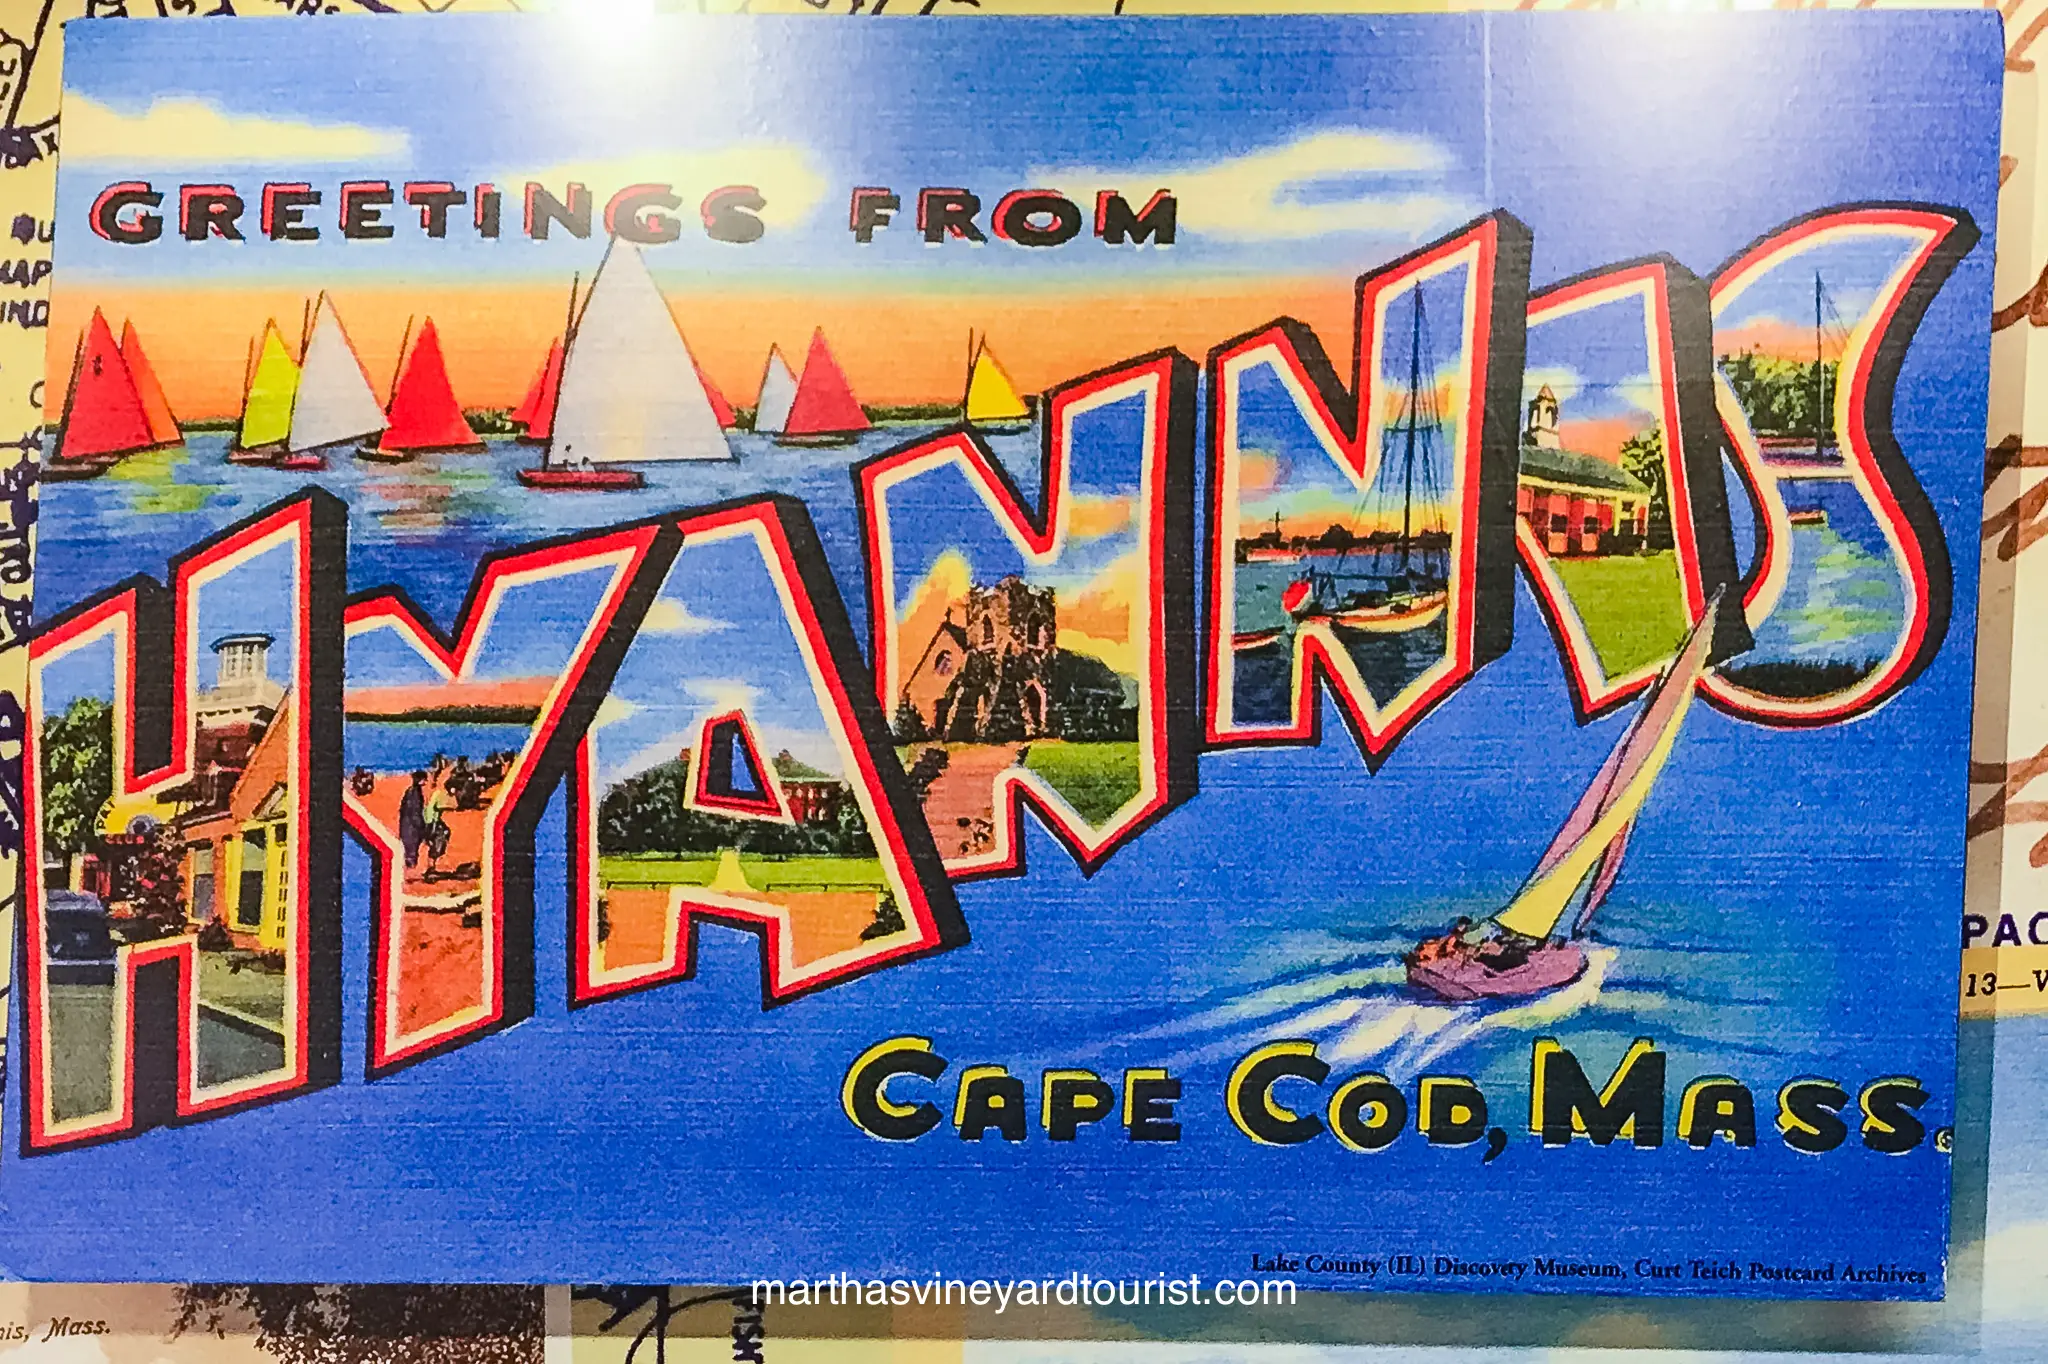 a postcard saying Greetings from Hyannis